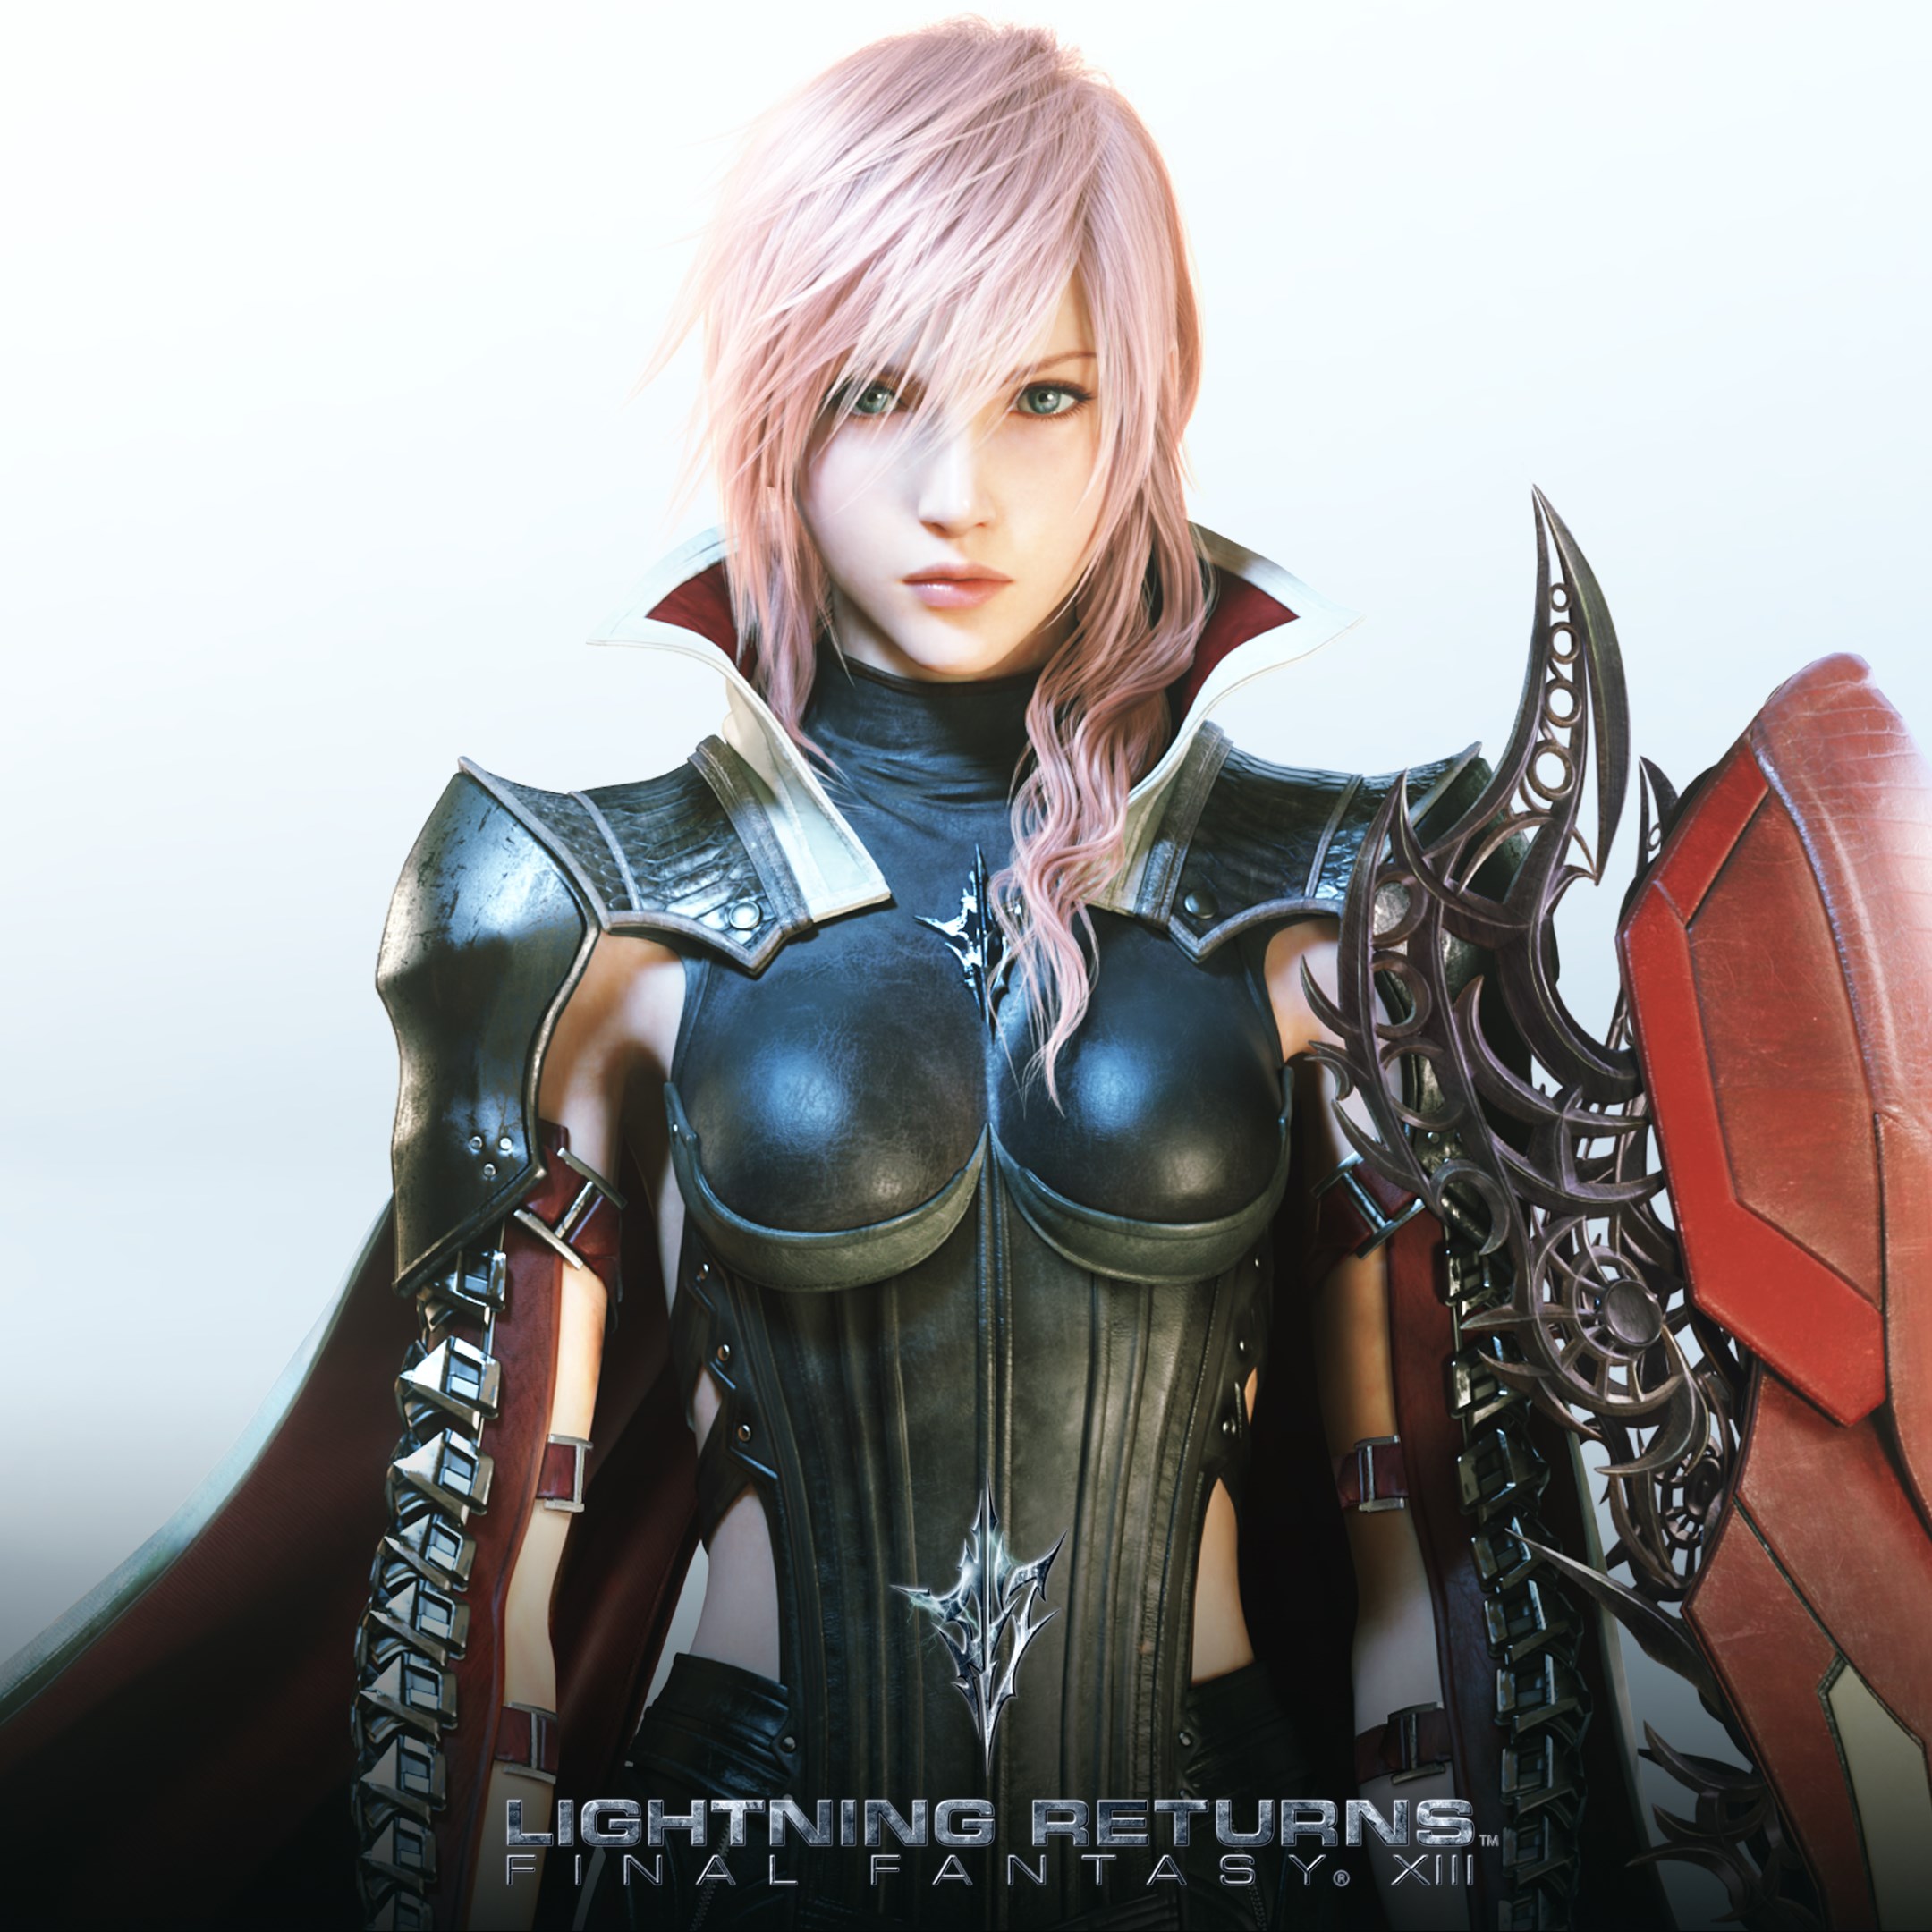 LIGHTNING RETURNS: FINAL FANTASY XIII technical specifications for computer